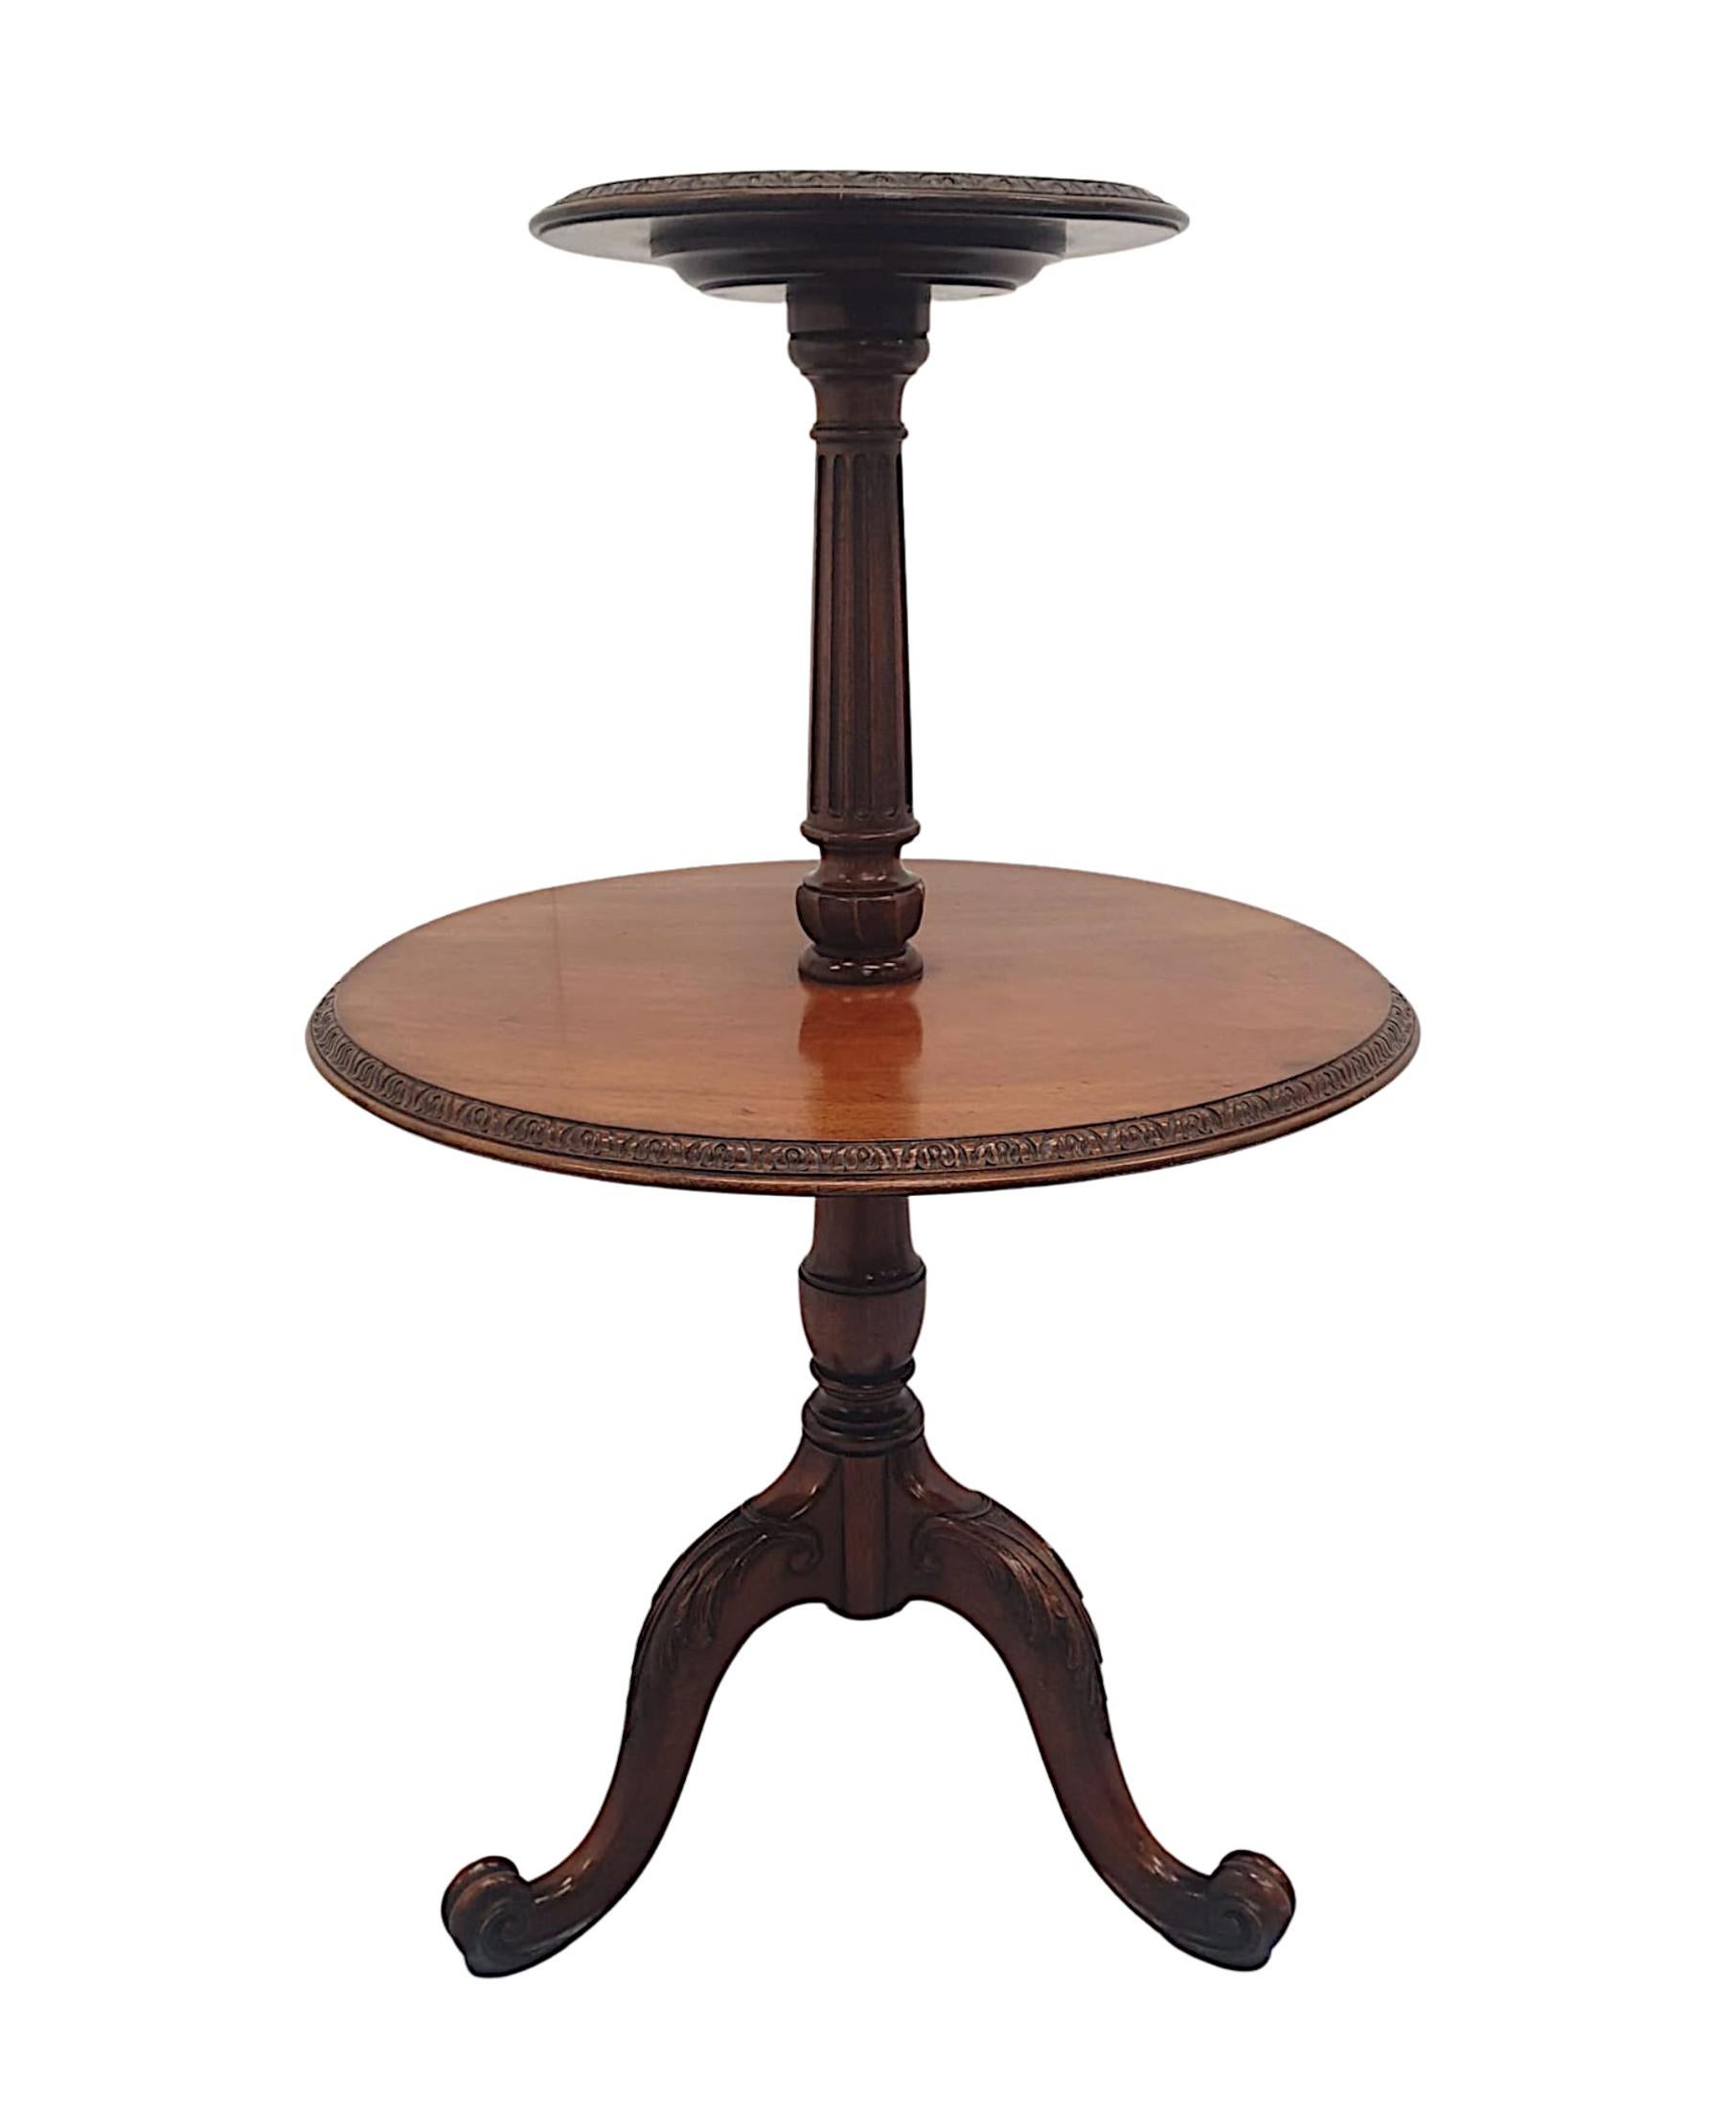 A very fine and rare 19th Century mahogany two tier wine or occasional table of circular form, exceptional quality and beautifully hand carved with rich patination and grain.  The moulded, well figured top tier with gorgeous carved border detail is